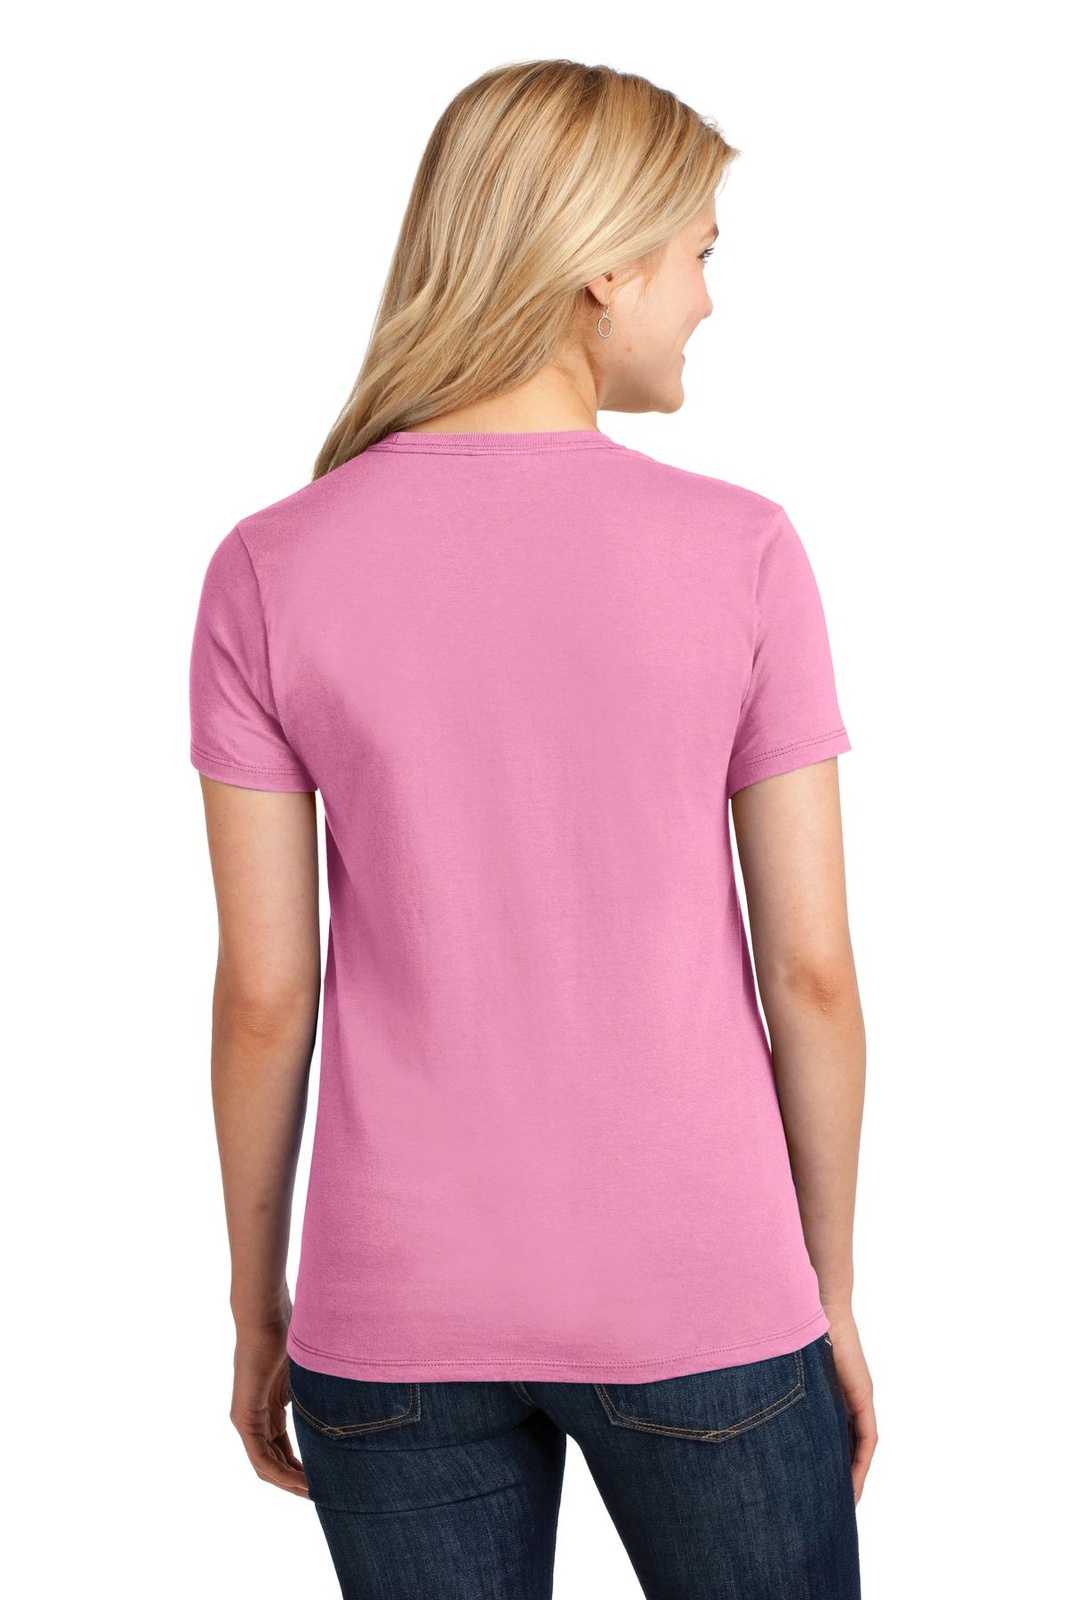 Port & Company LPC54 Ladies Core Cotton Tee - Candy Pink - HIT a Double - 1